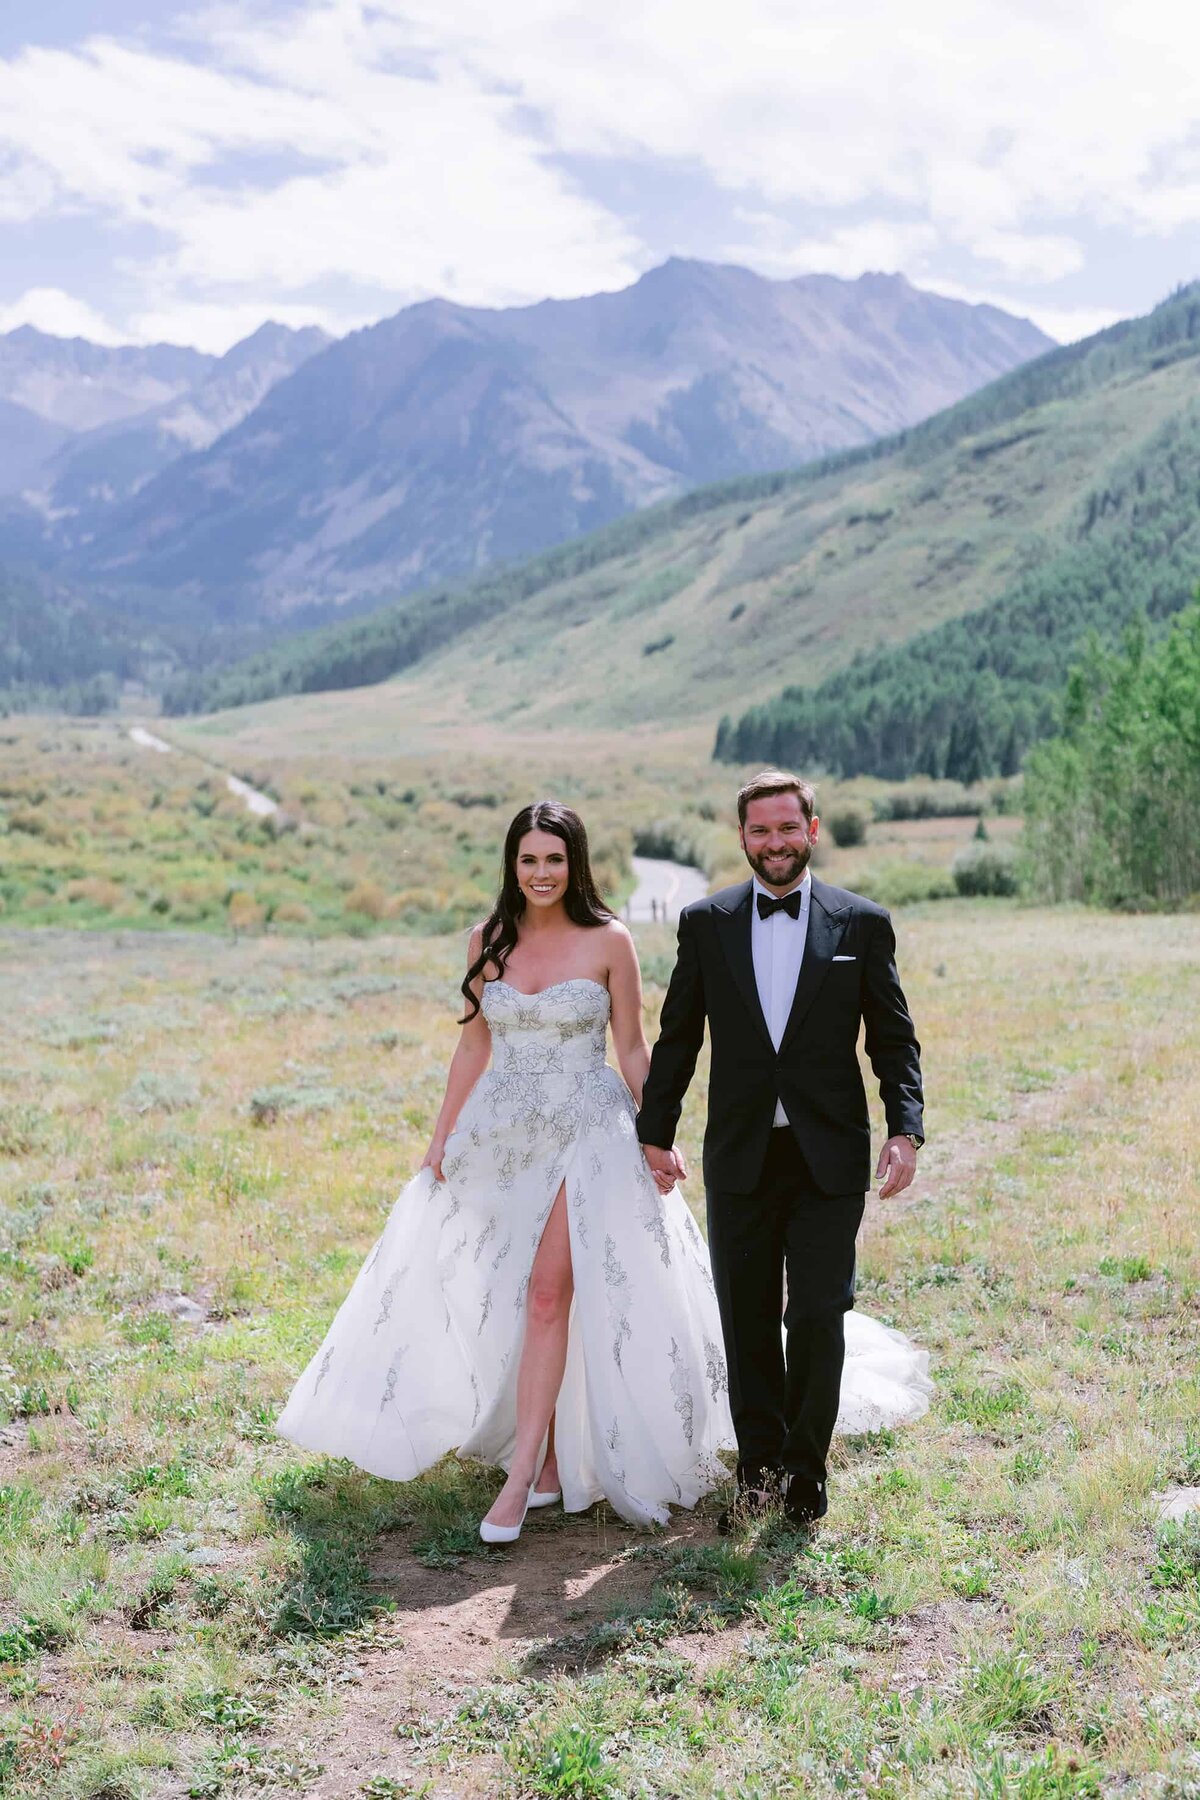 Smiling bride and groom in an outdoor mountain setting